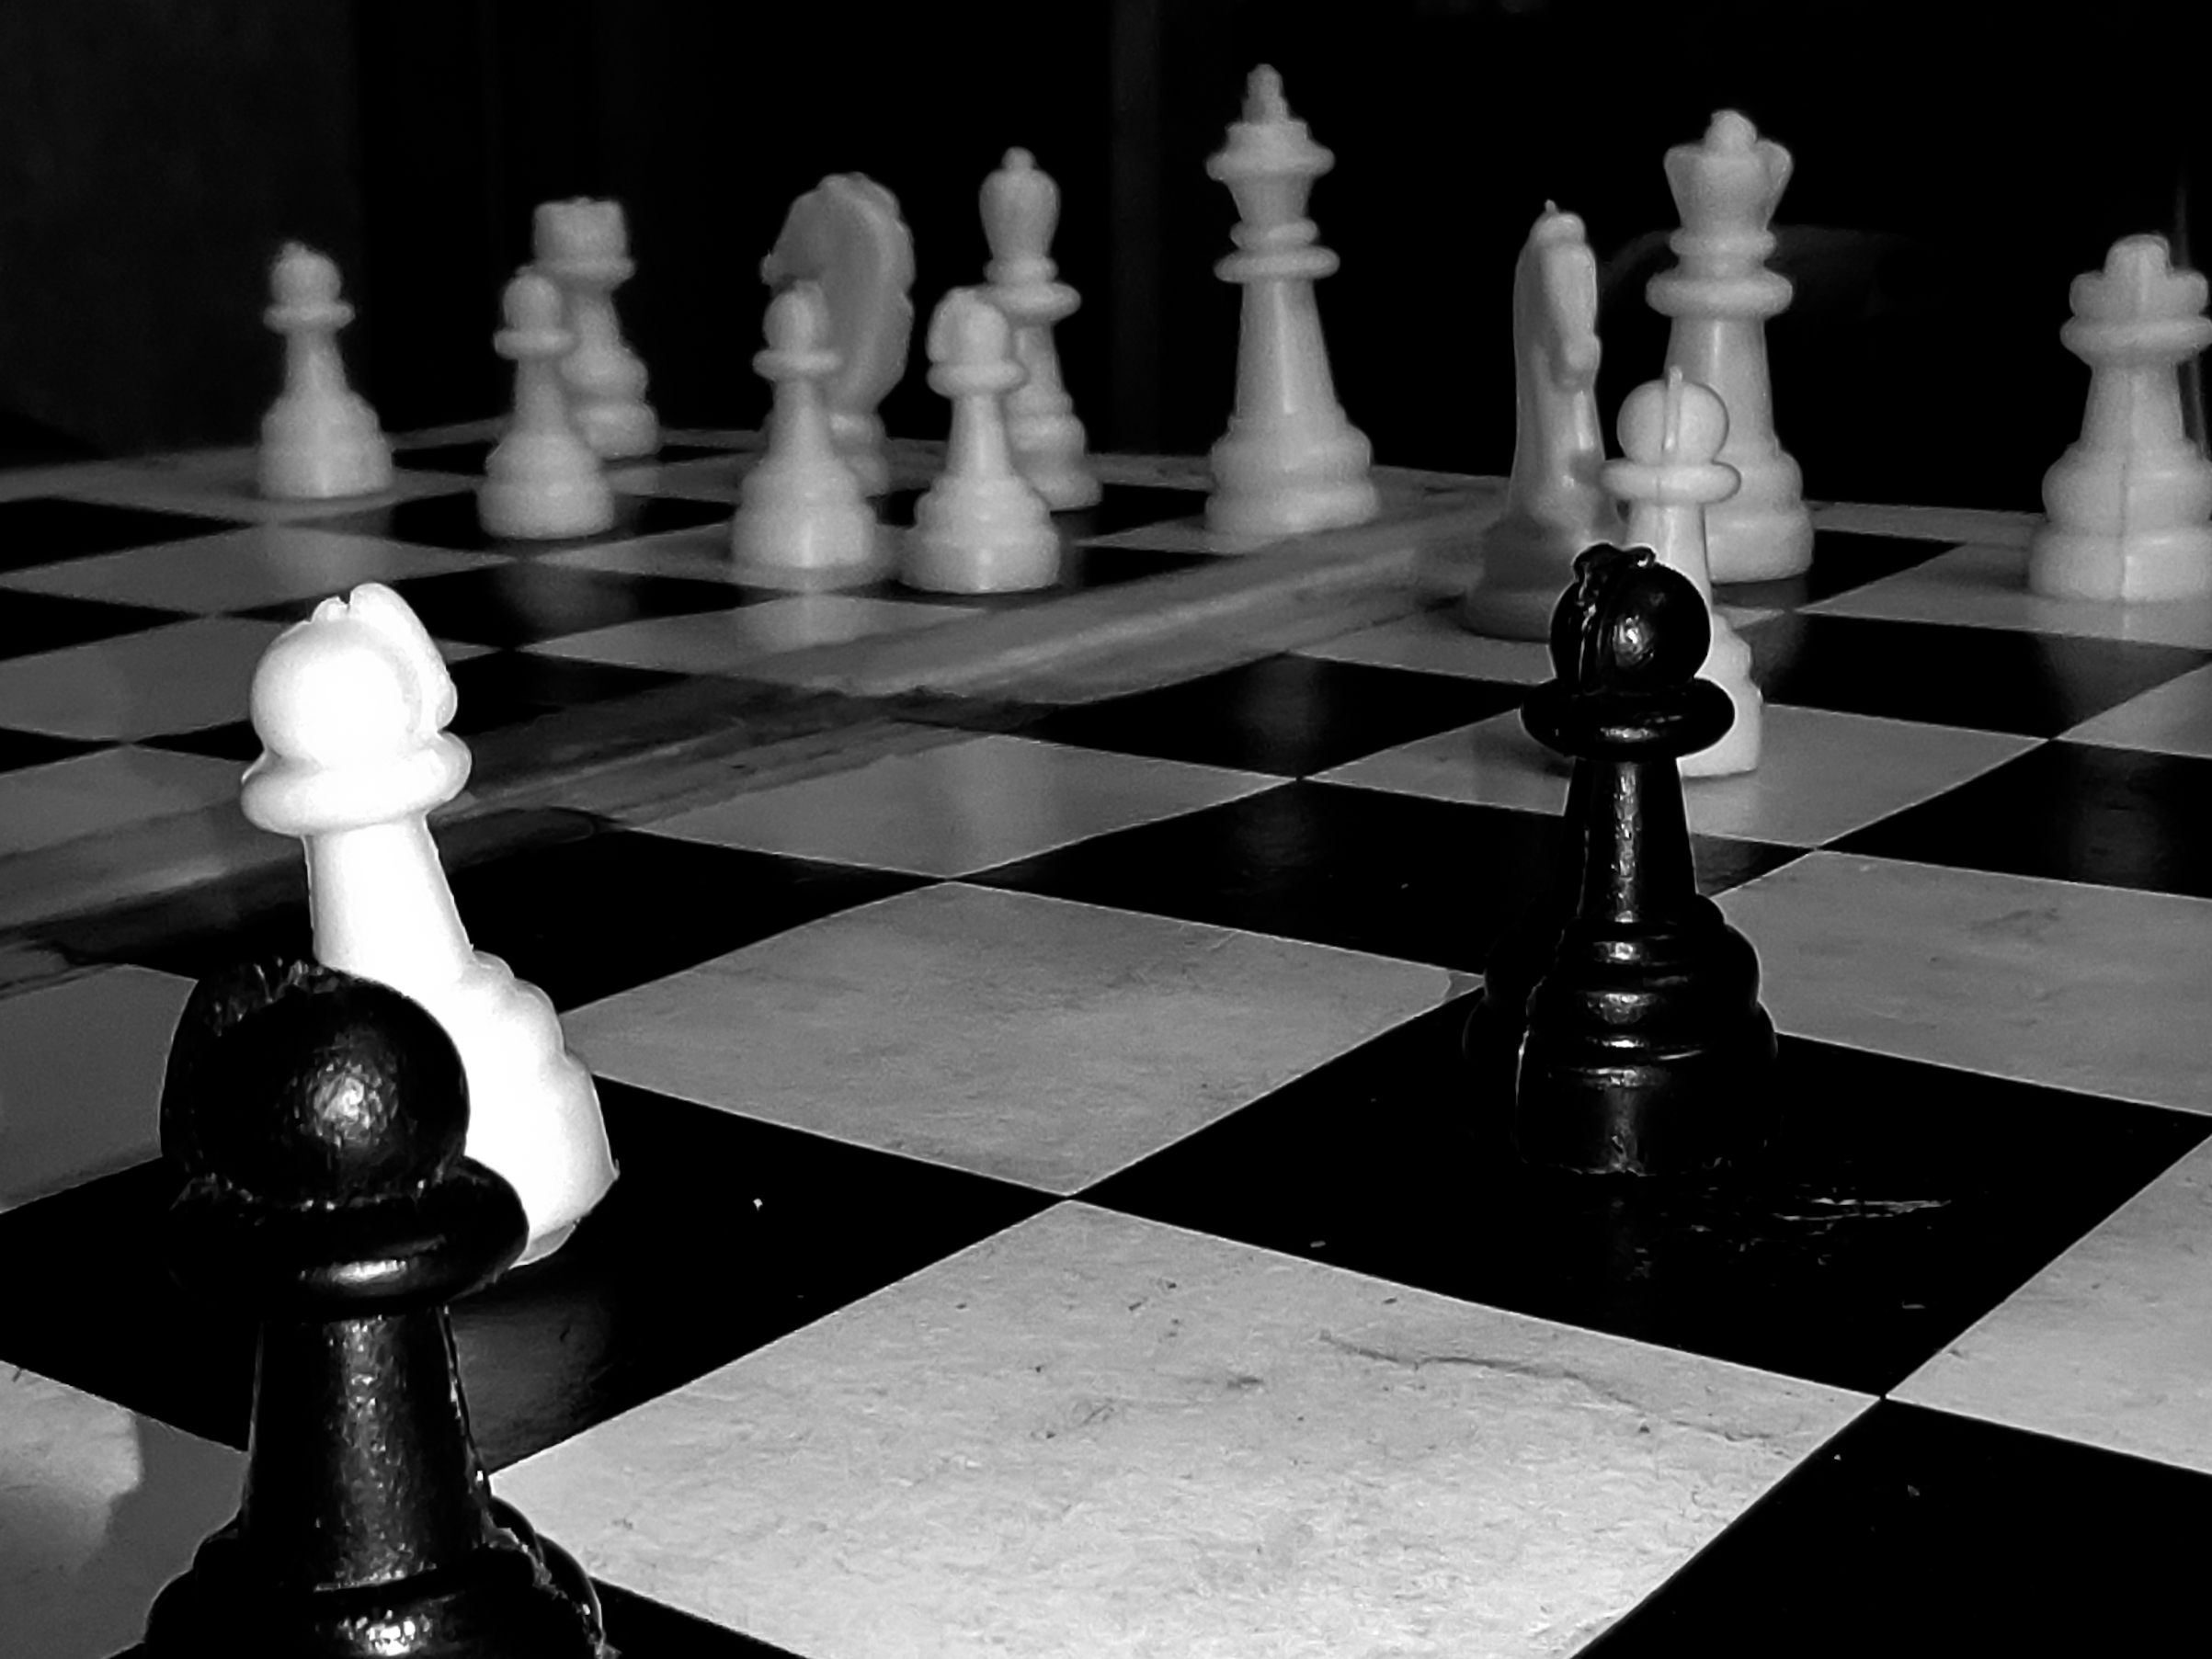 Chess pieces on a chess board